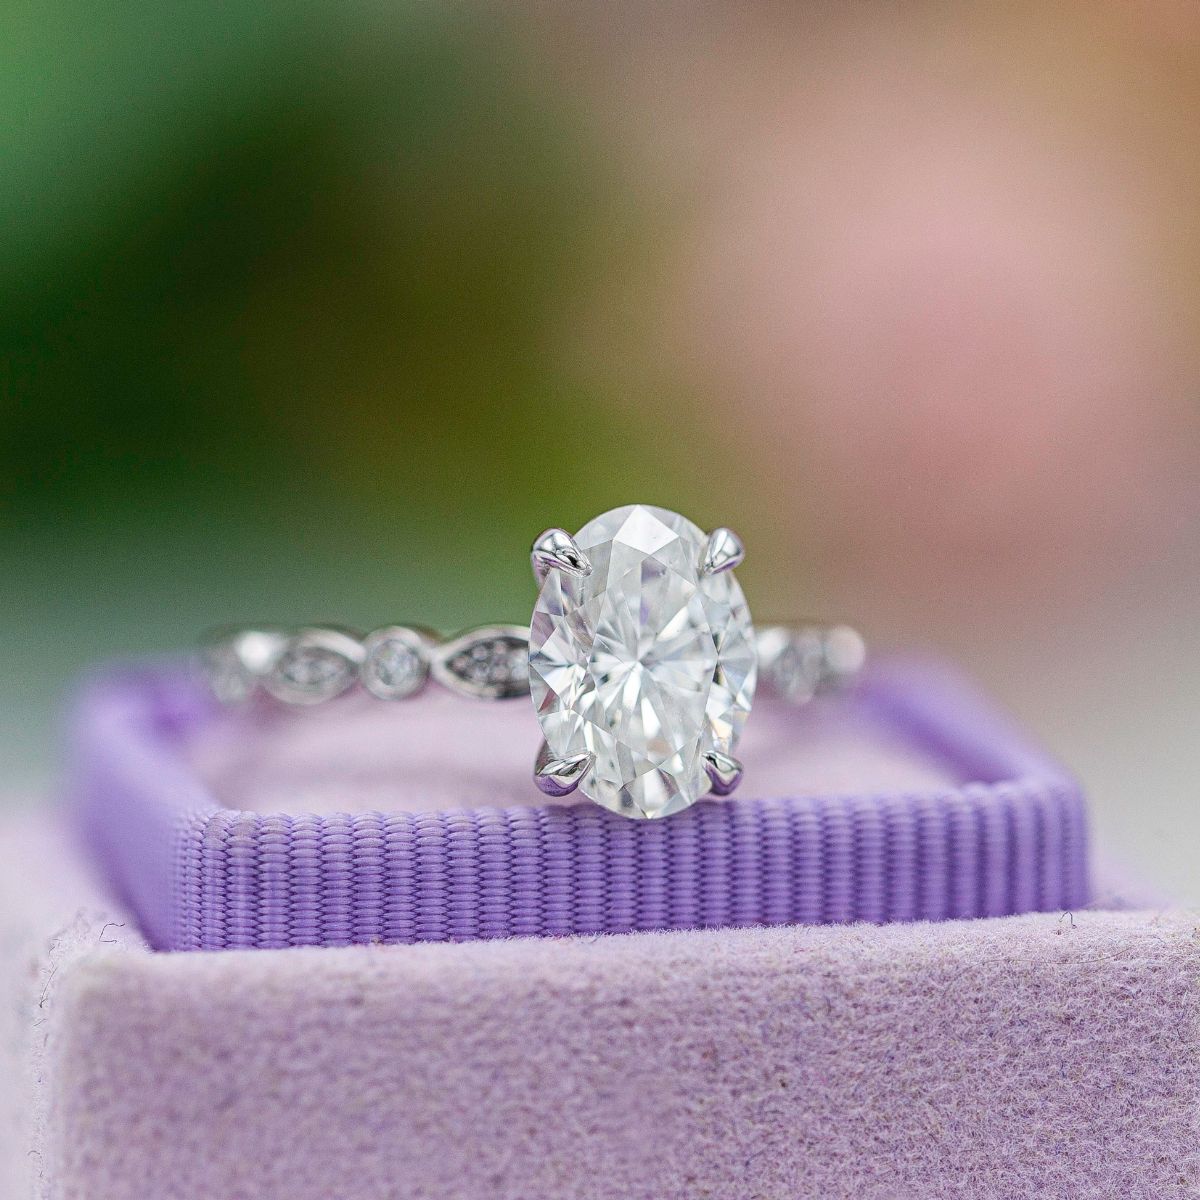 Center Setting Styles (for the Perfect Engagement Ring) | CustomMade.com